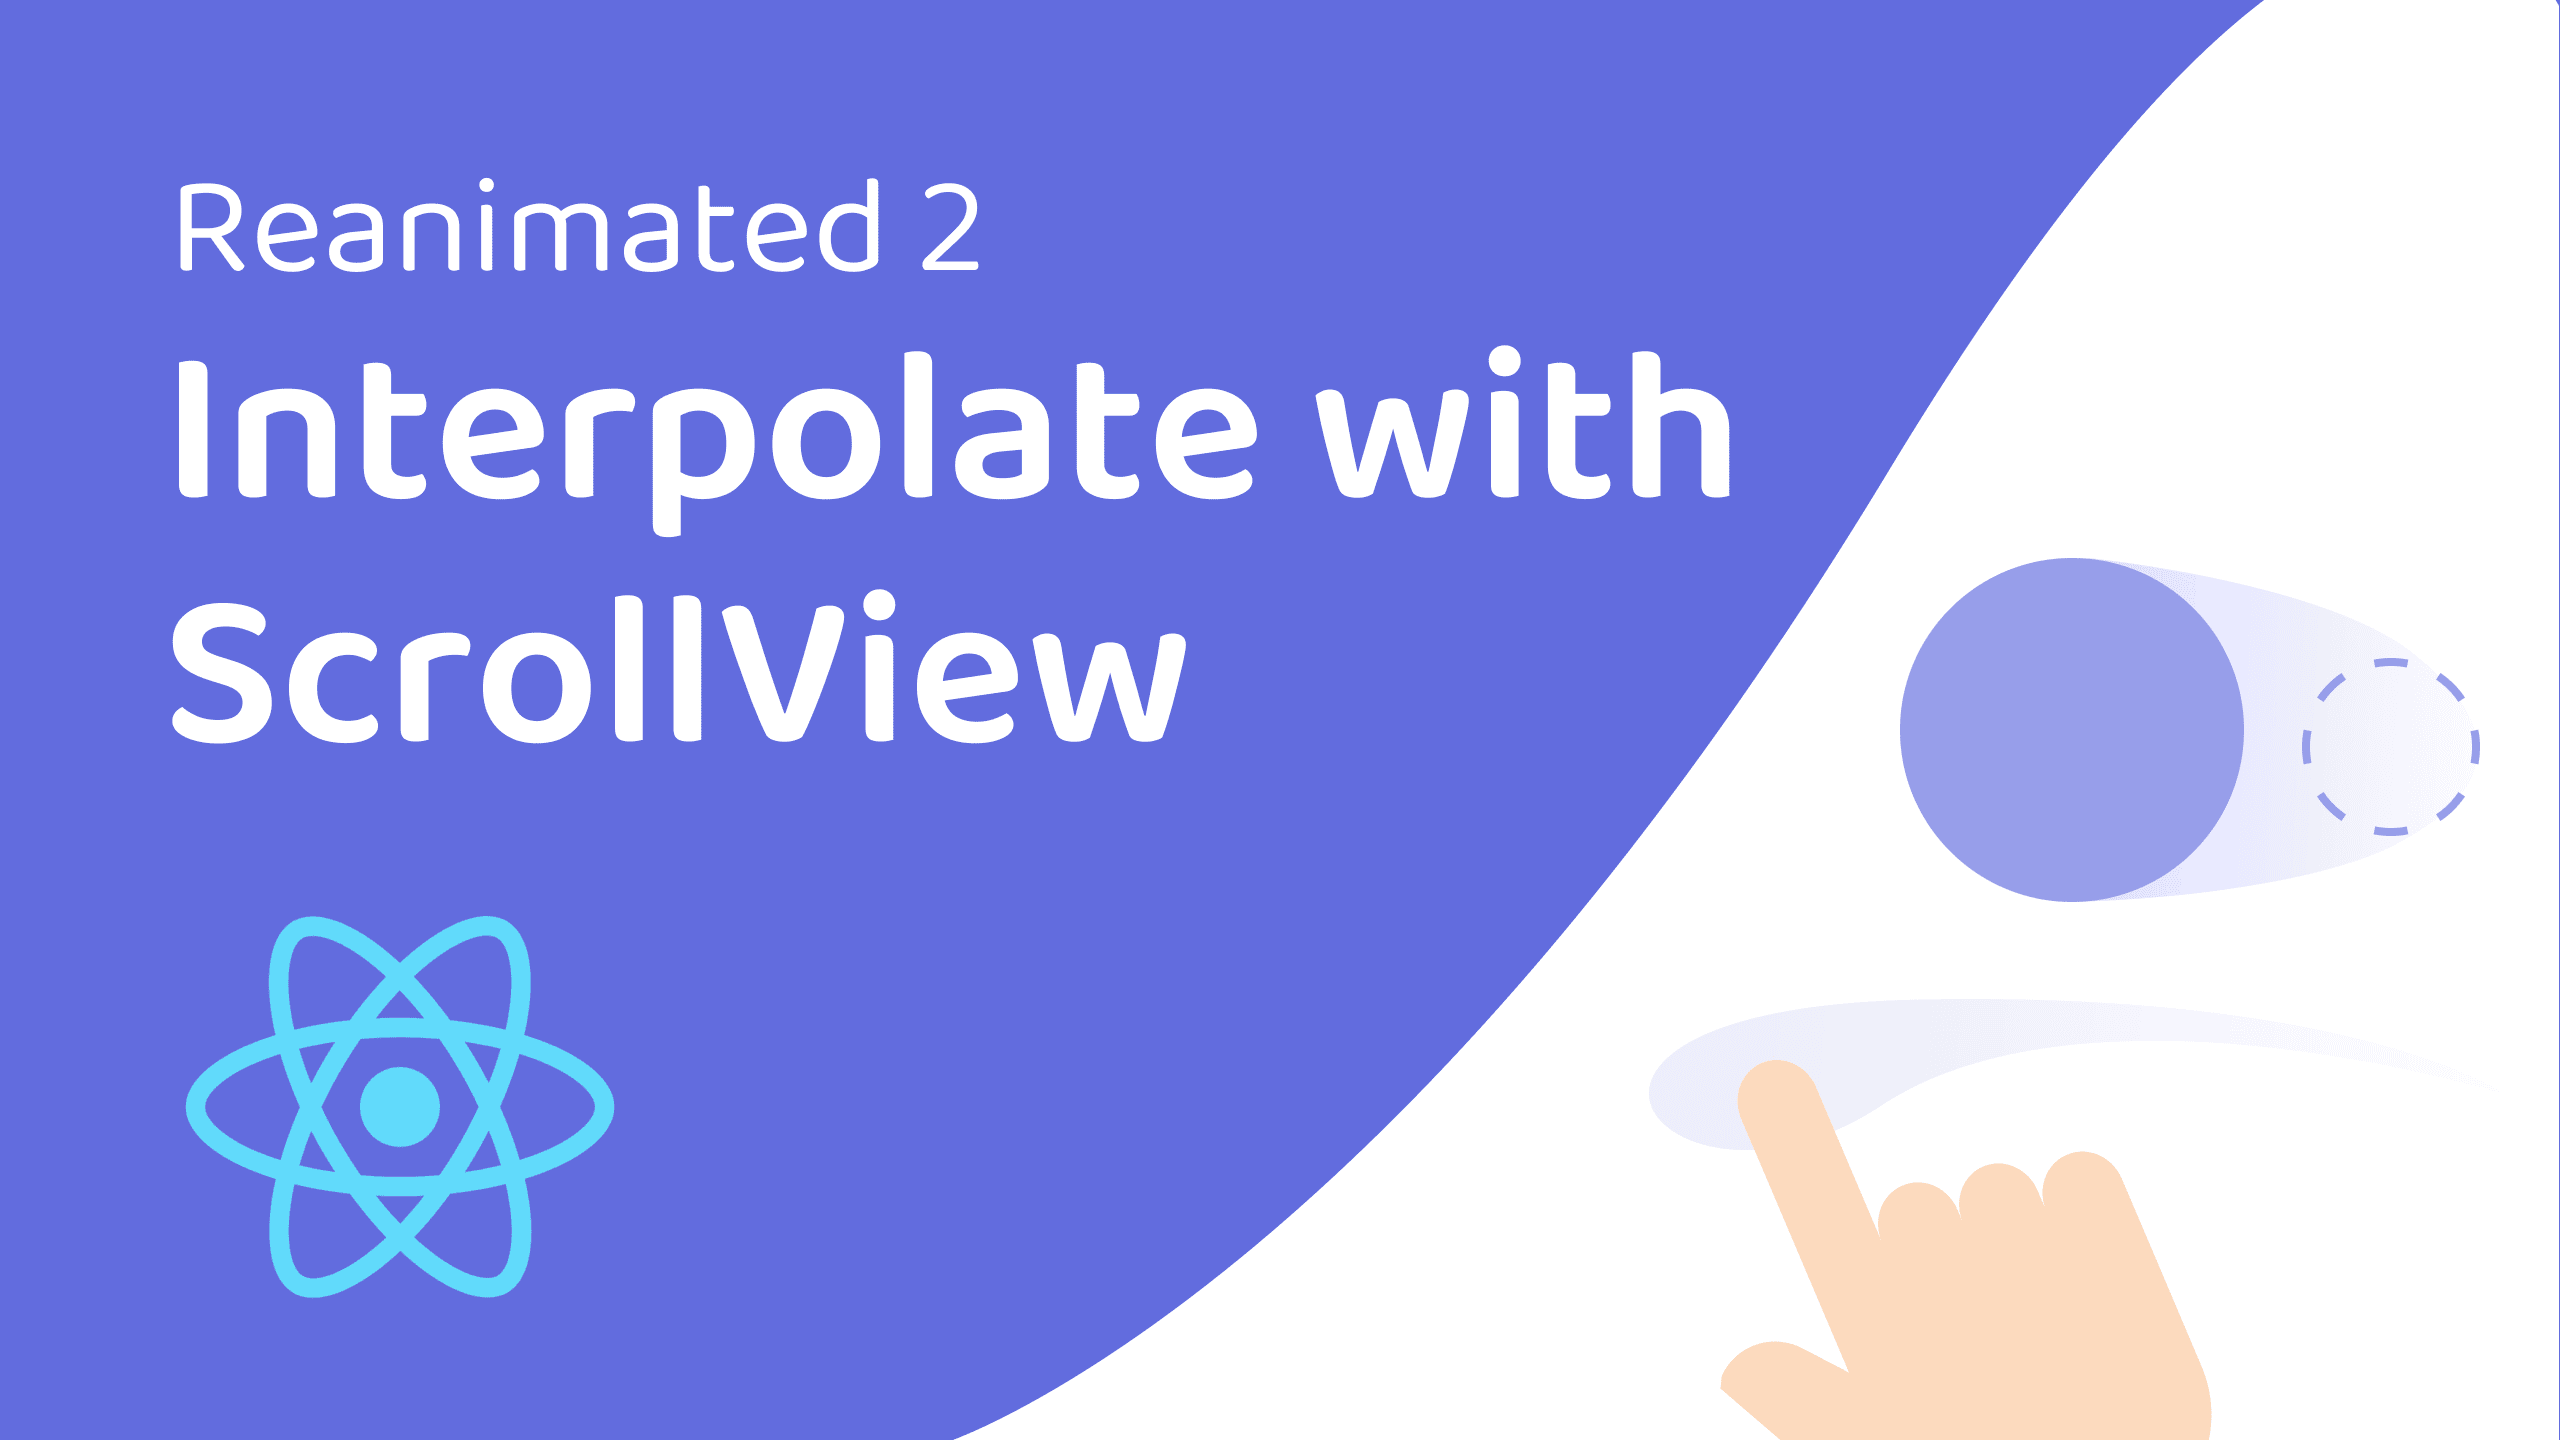 Post image - Interpolate with ScrollView like a Pro (Reanimated 2)